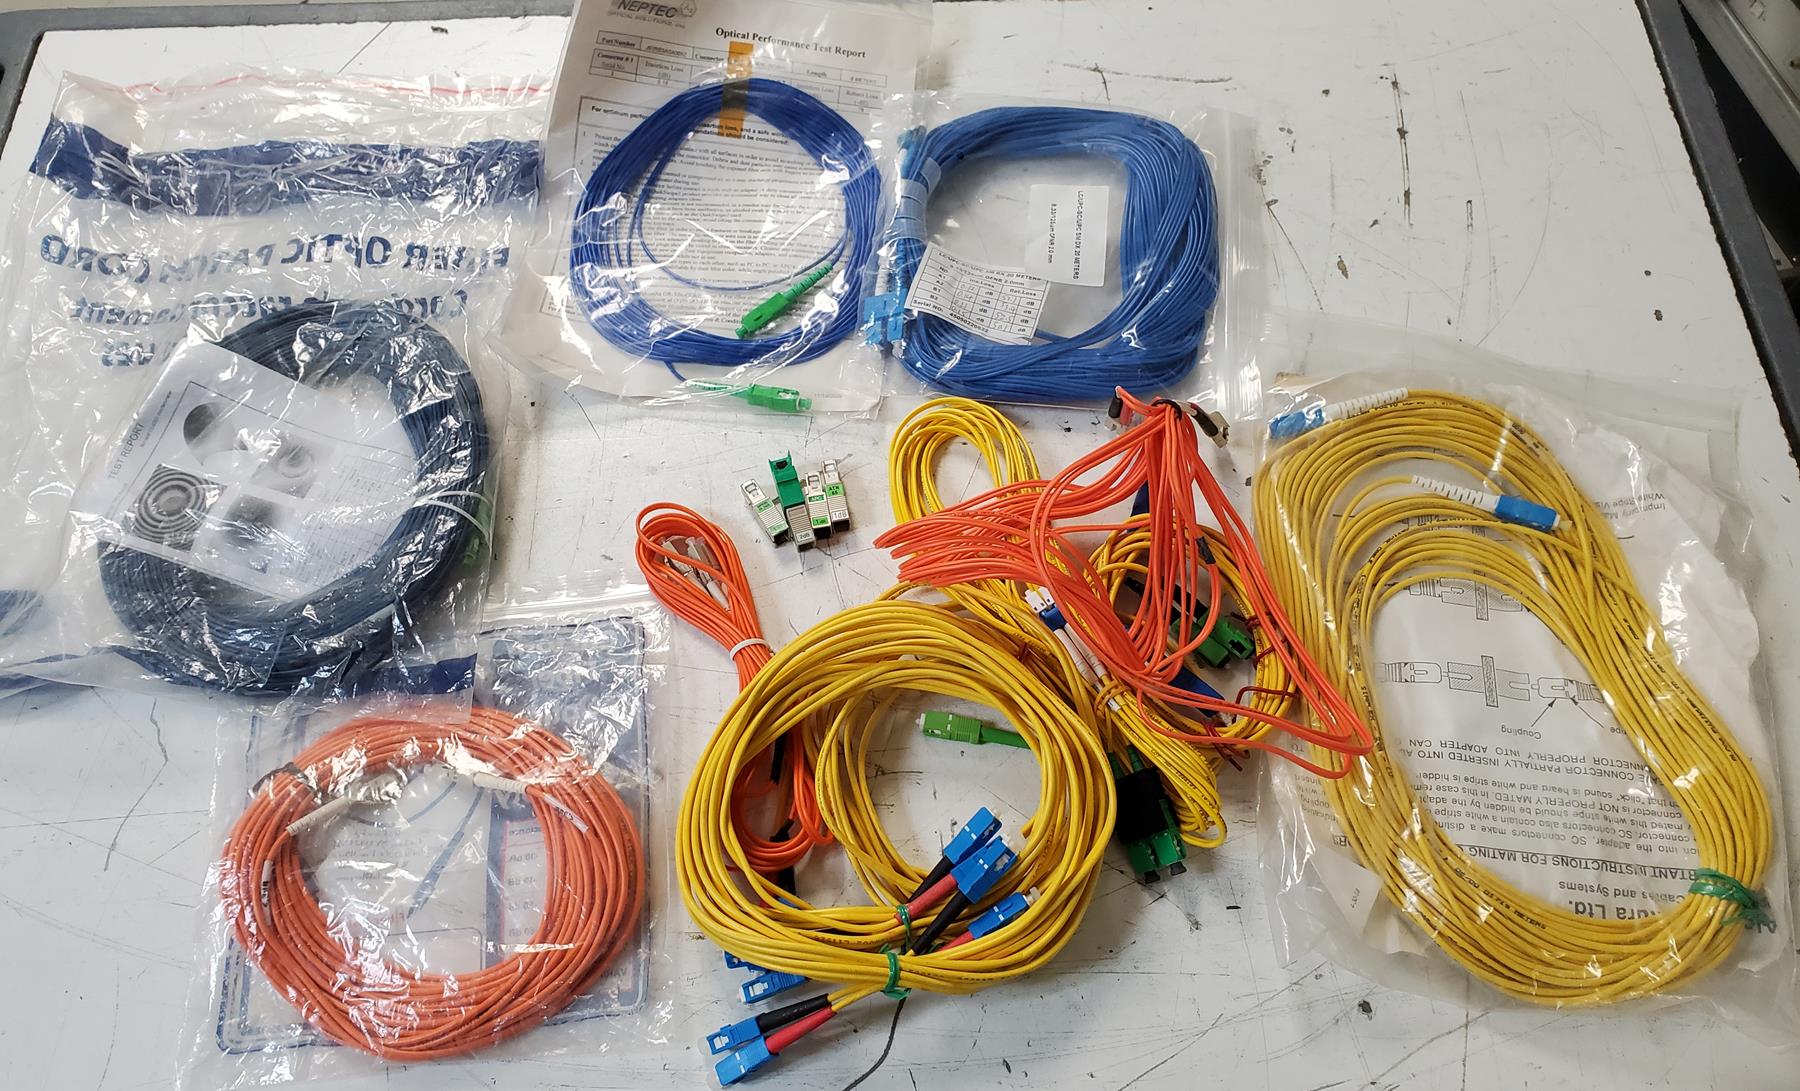 Similar product is AccuSource patchcord mixed lot